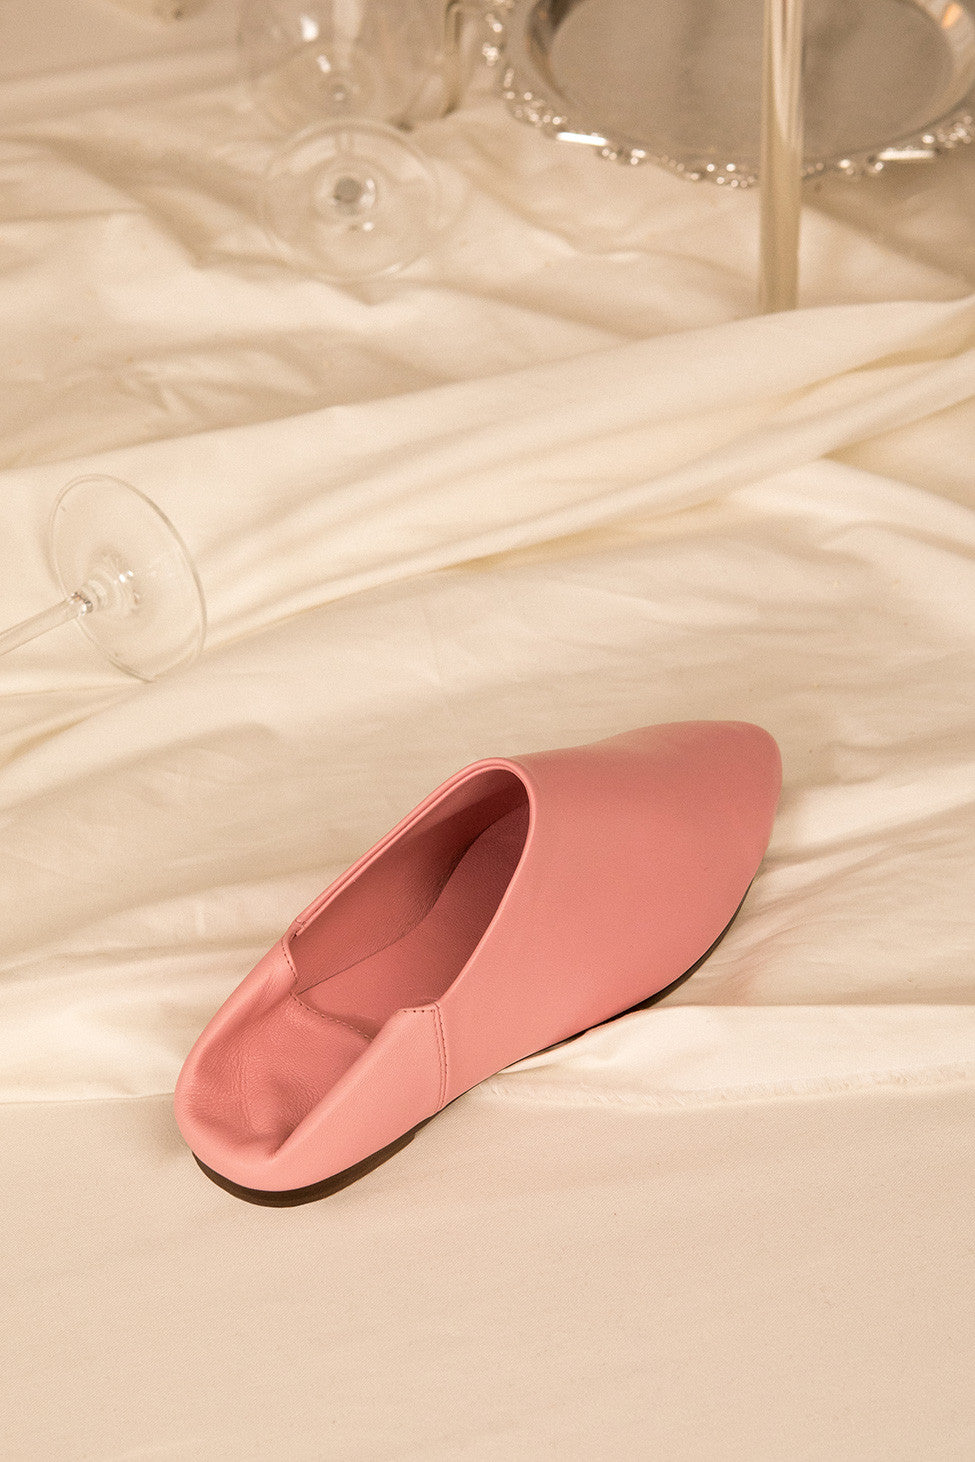 Selma Babouche in Pink with cowhide leather soles and folded backs slide, pointy toe. Slip on.  